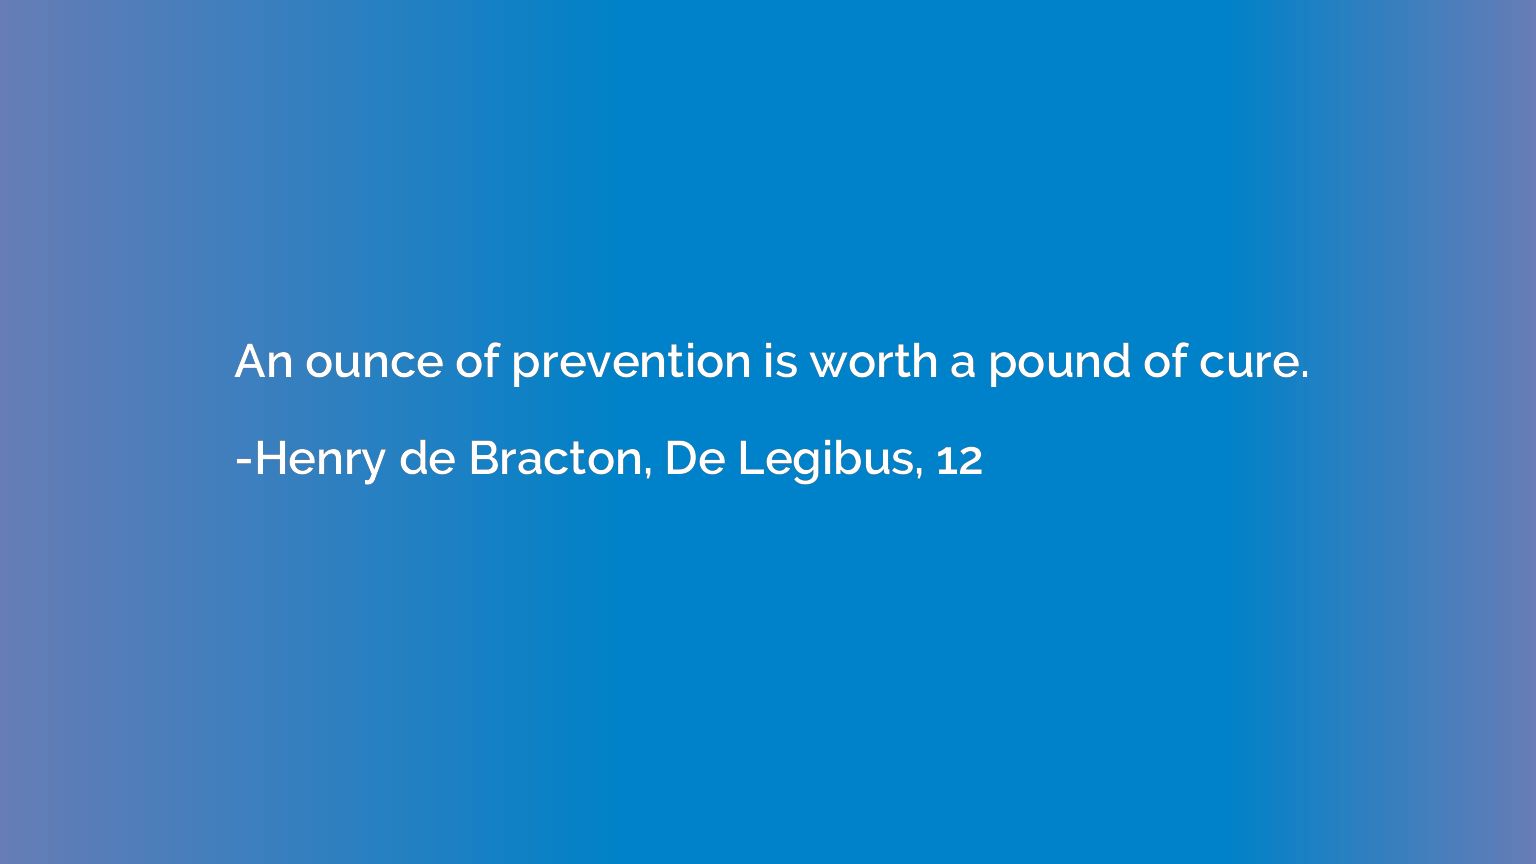 An ounce of prevention is worth a pound of cure.